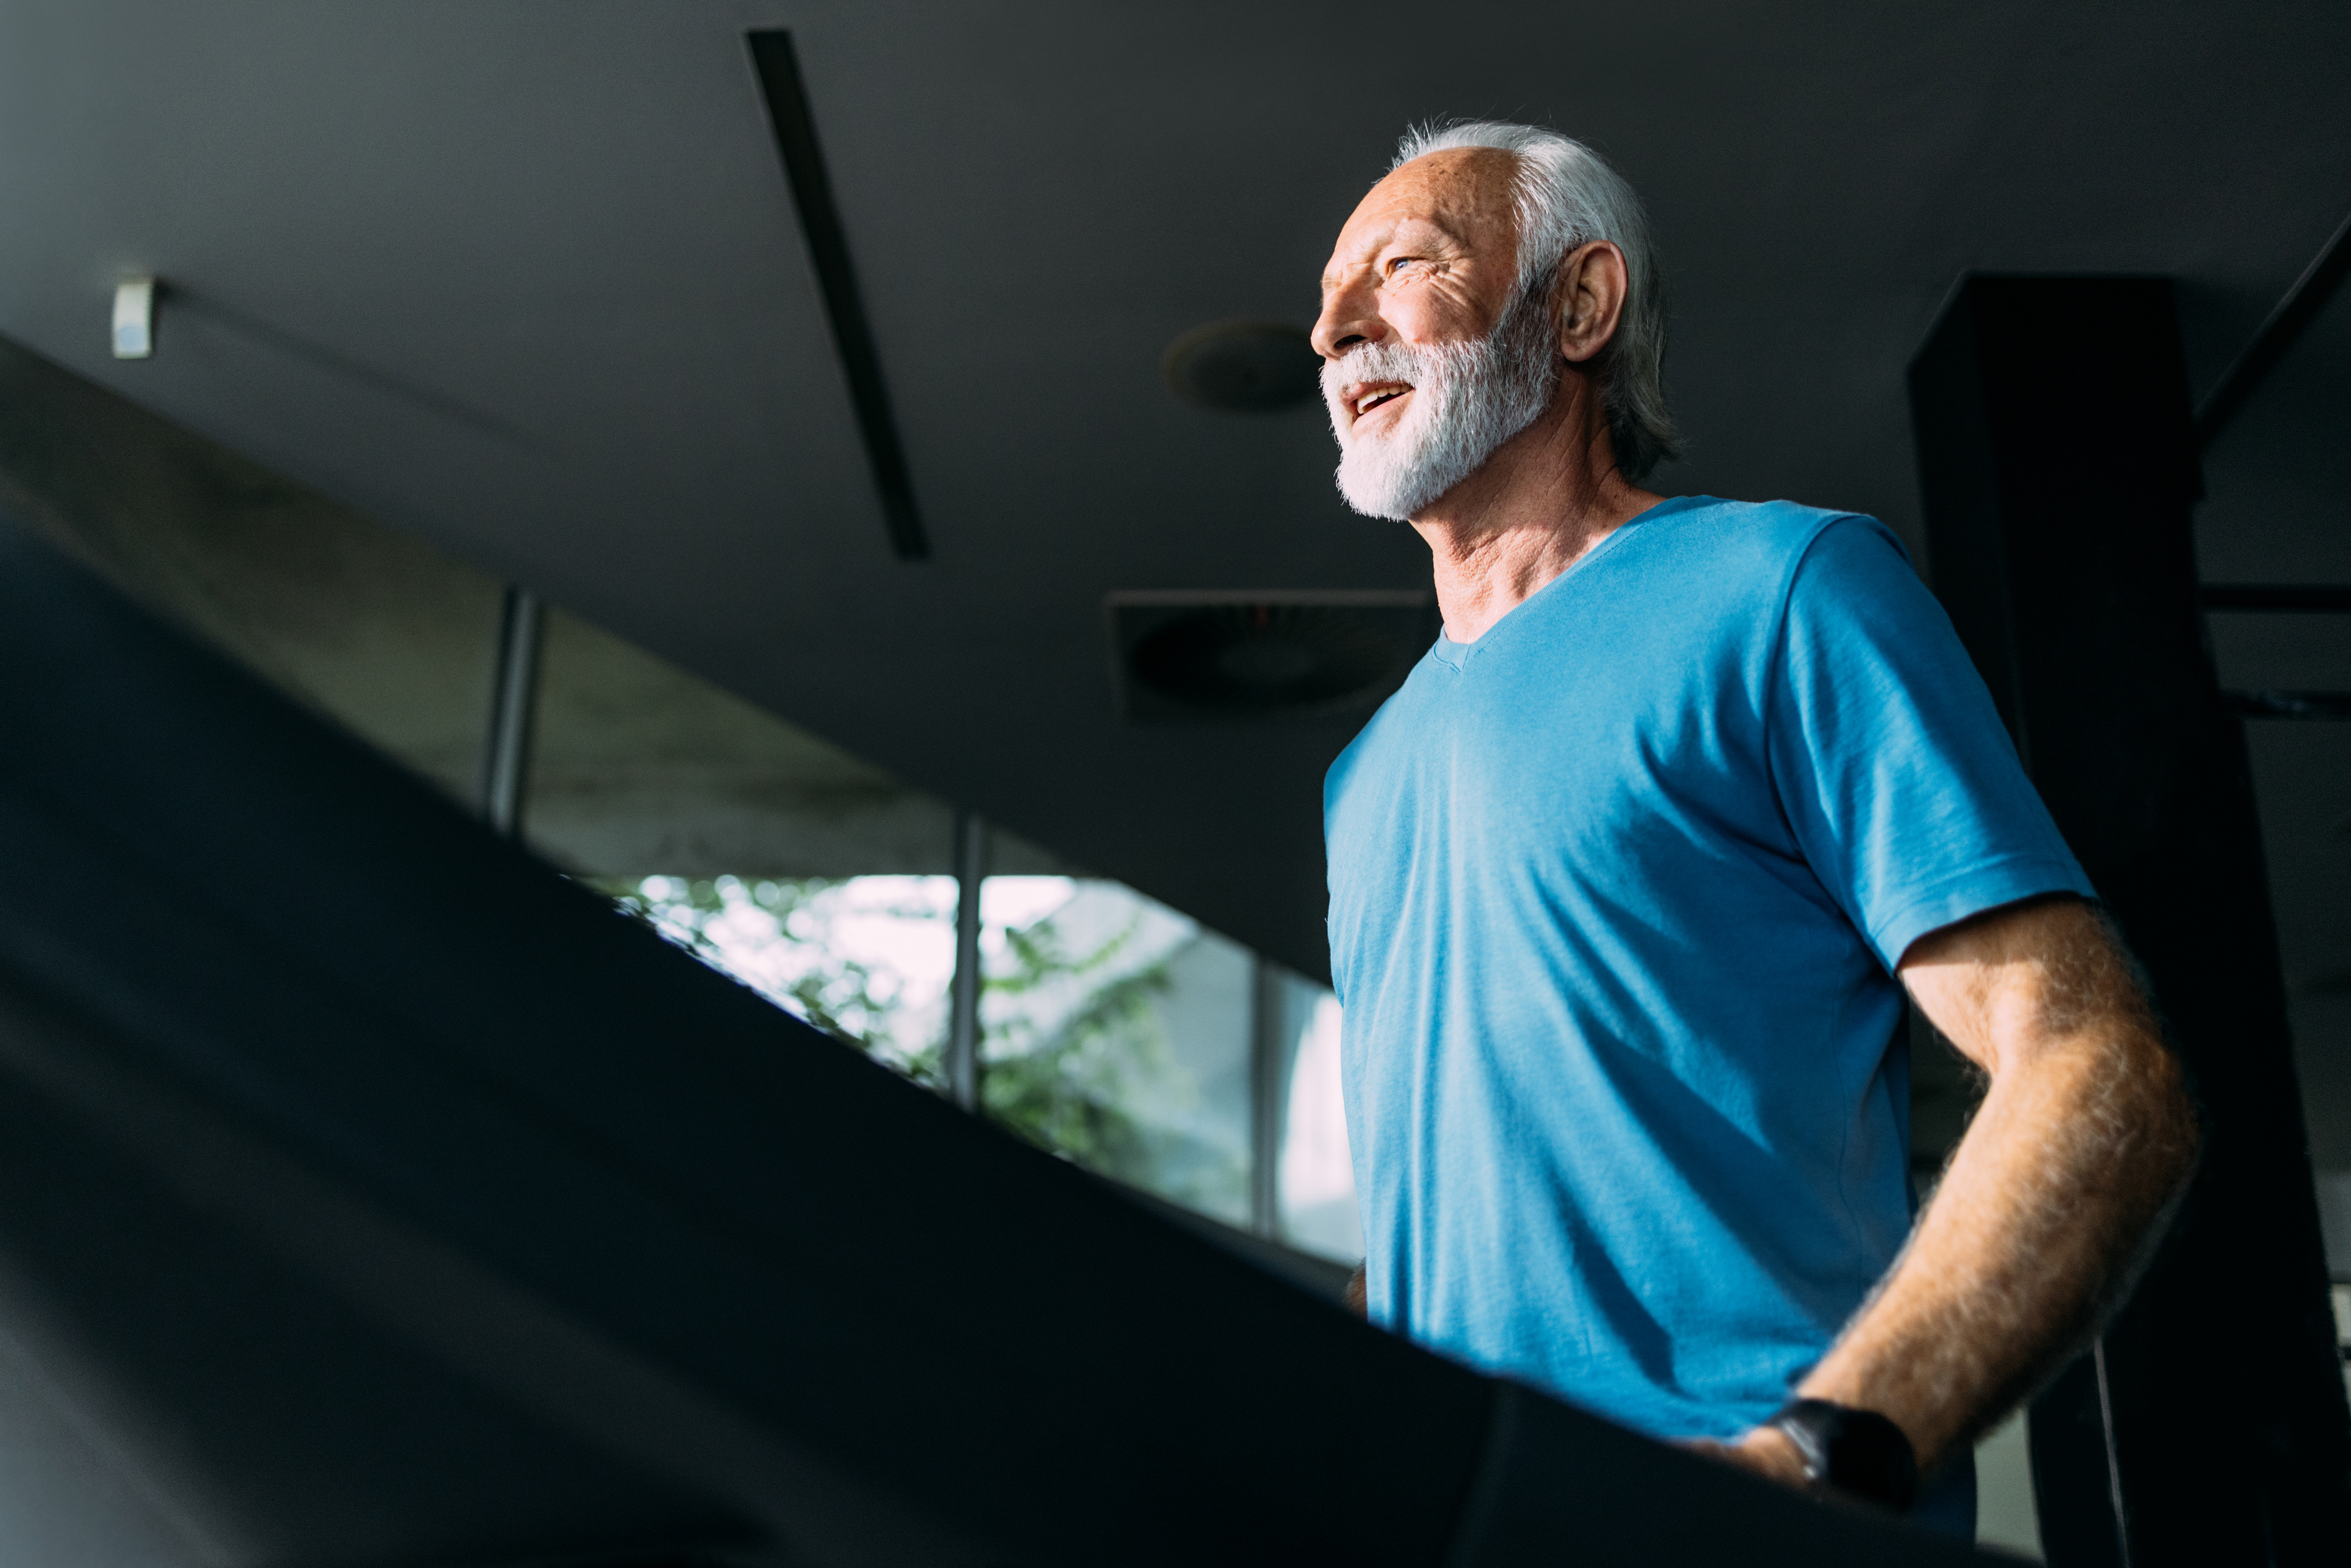 An older man with a white beard and mustache wearing a blue shirt is smiling while walking on a treadmill indoors